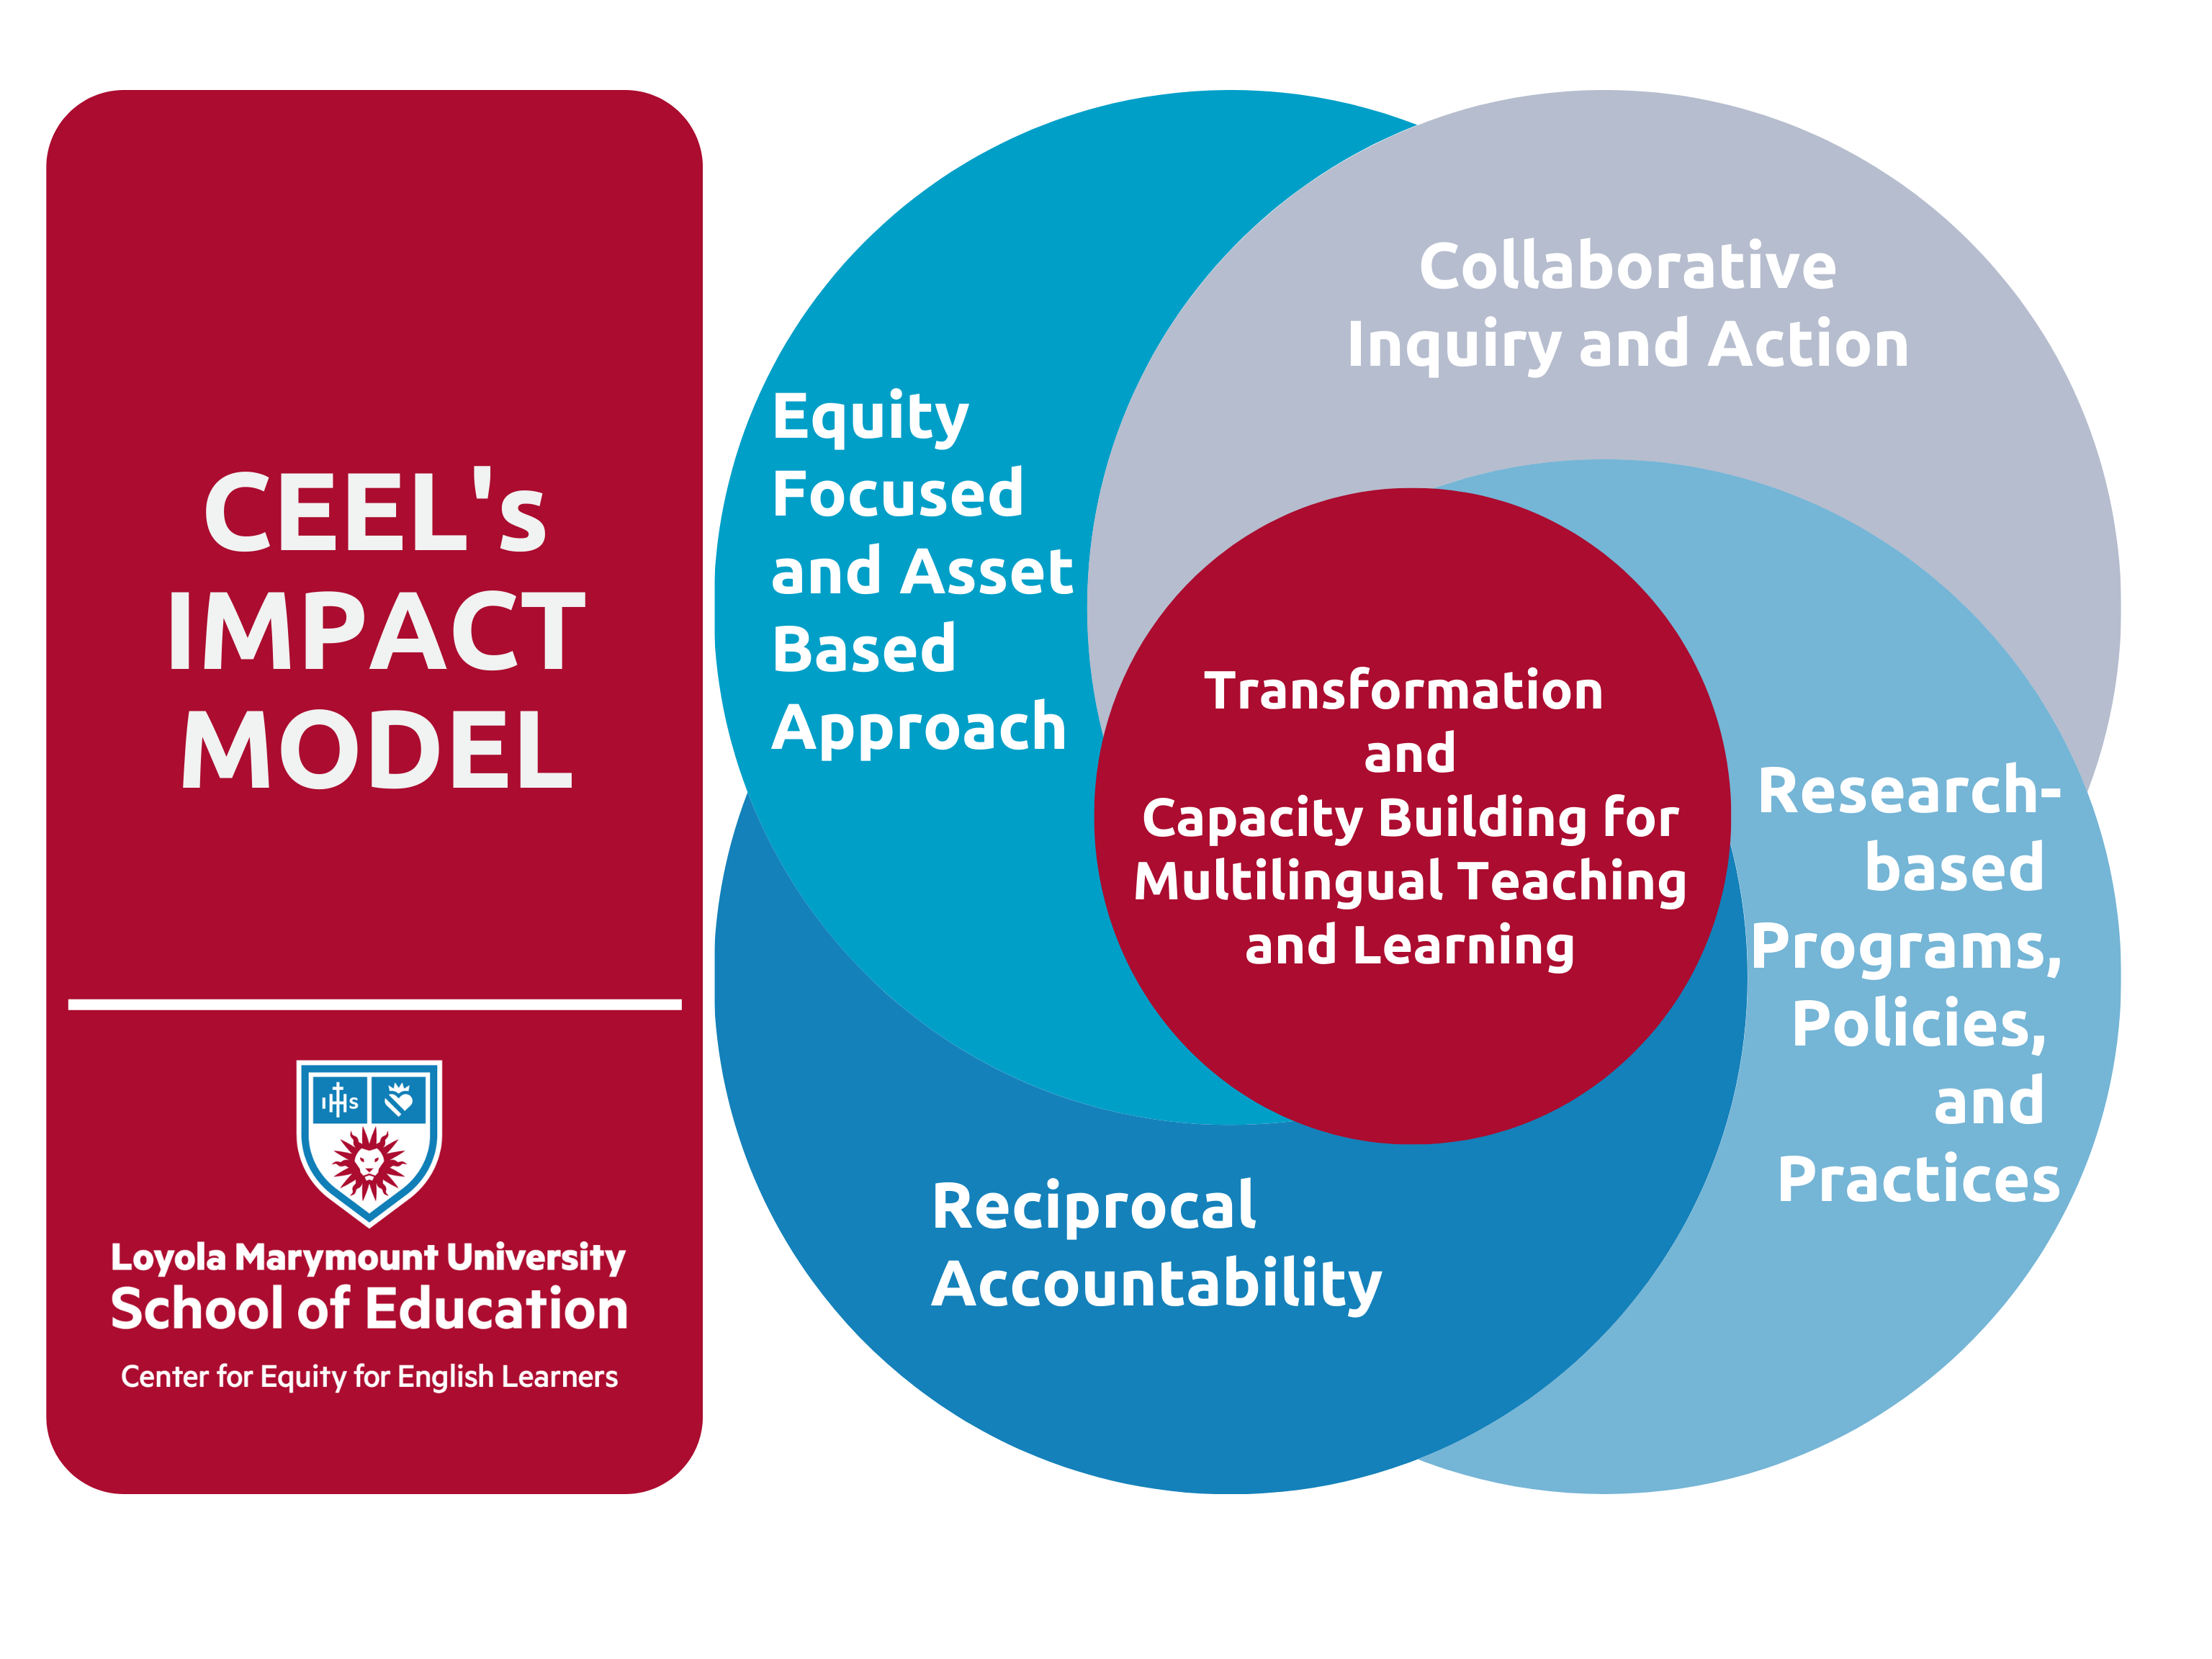 CEEL's Diversity Equity and Inclusion Impact Model - A melding of Equity Focused and Asset Based Approach, Reciprocal Accountability, Research- based Programs, Policies, and Practices, and Collaborative Inquiry and Action leading to Transformation  and Capacity Building for Multilingual Teaching and Learning